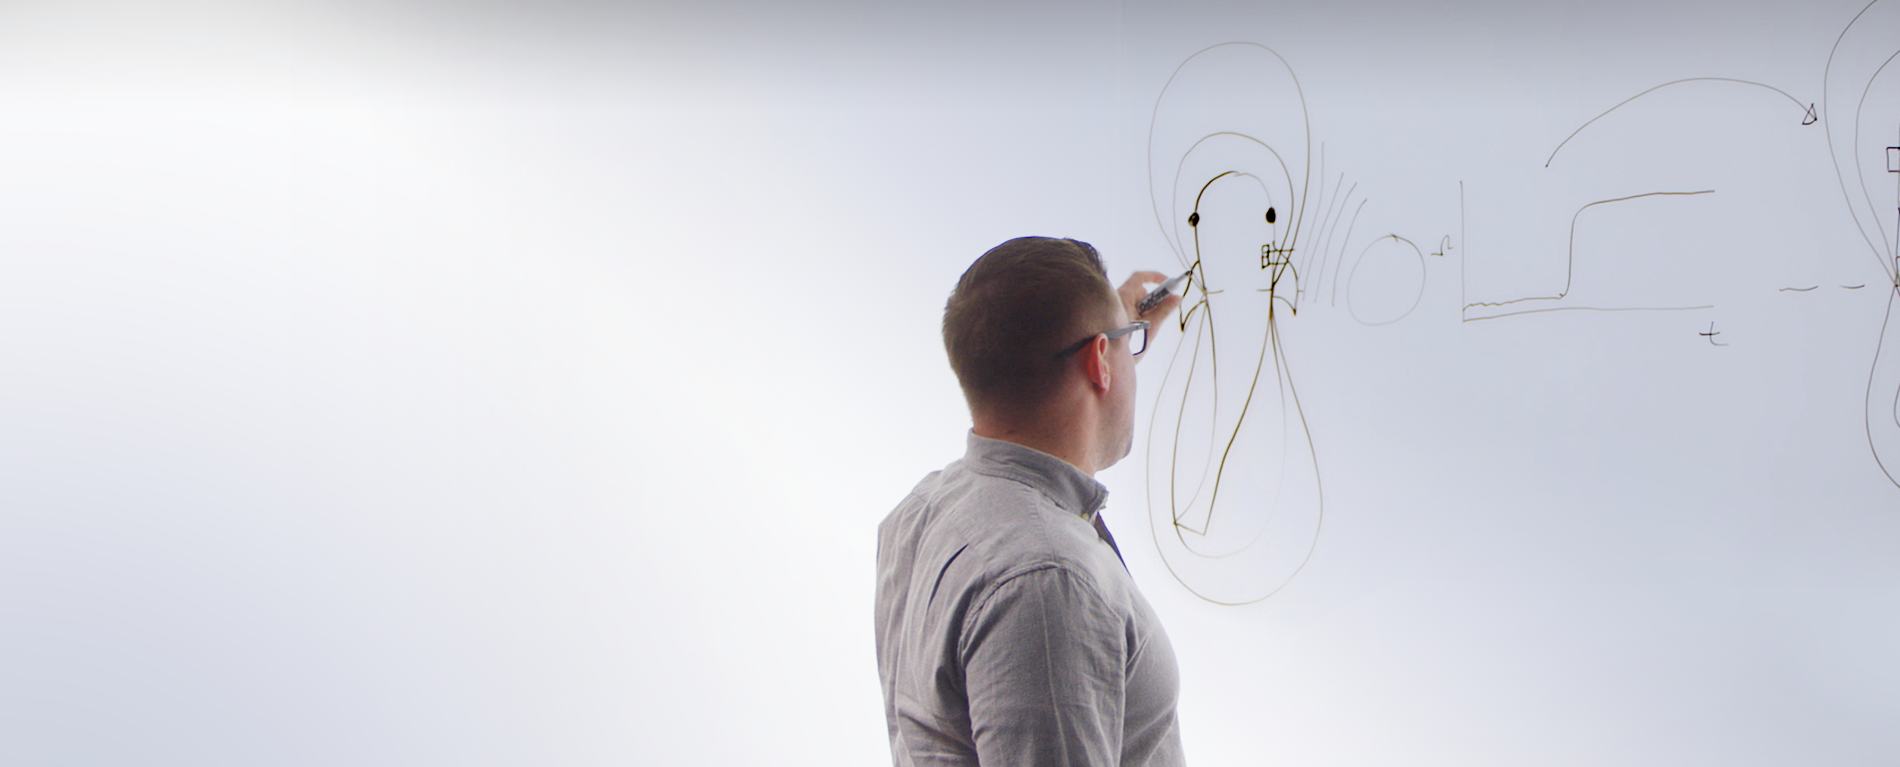 Boston Scientific research scientist drawing an electric fish on a whiteboard to illustrate how DIRECTSENSE™ Technology generates an electric field during RF ablation procedures.